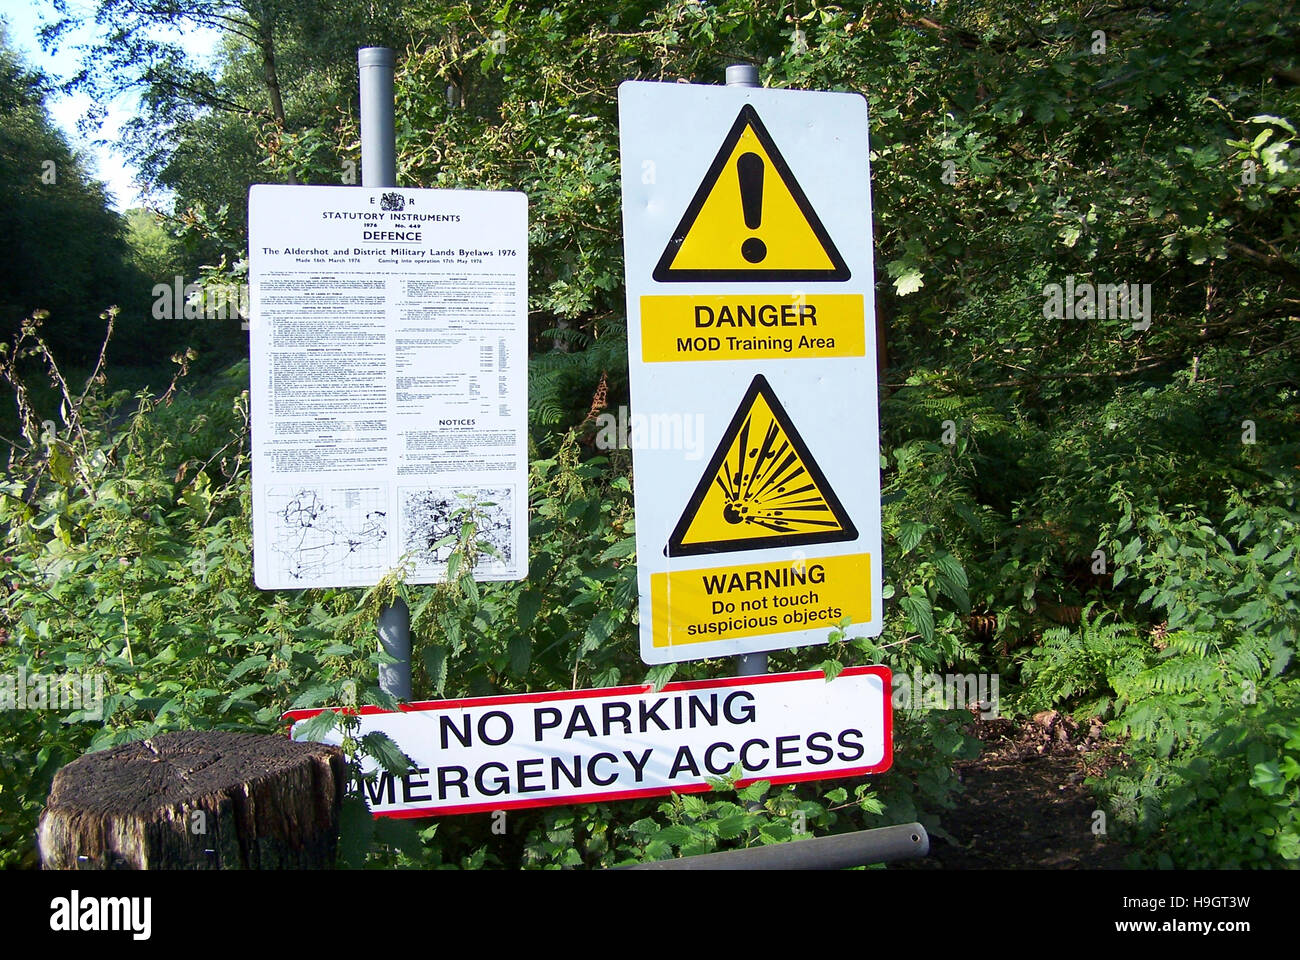 Danger warning signs at a Ministry of Defence training area, warning the public about unexploded bombs. Stock Photo